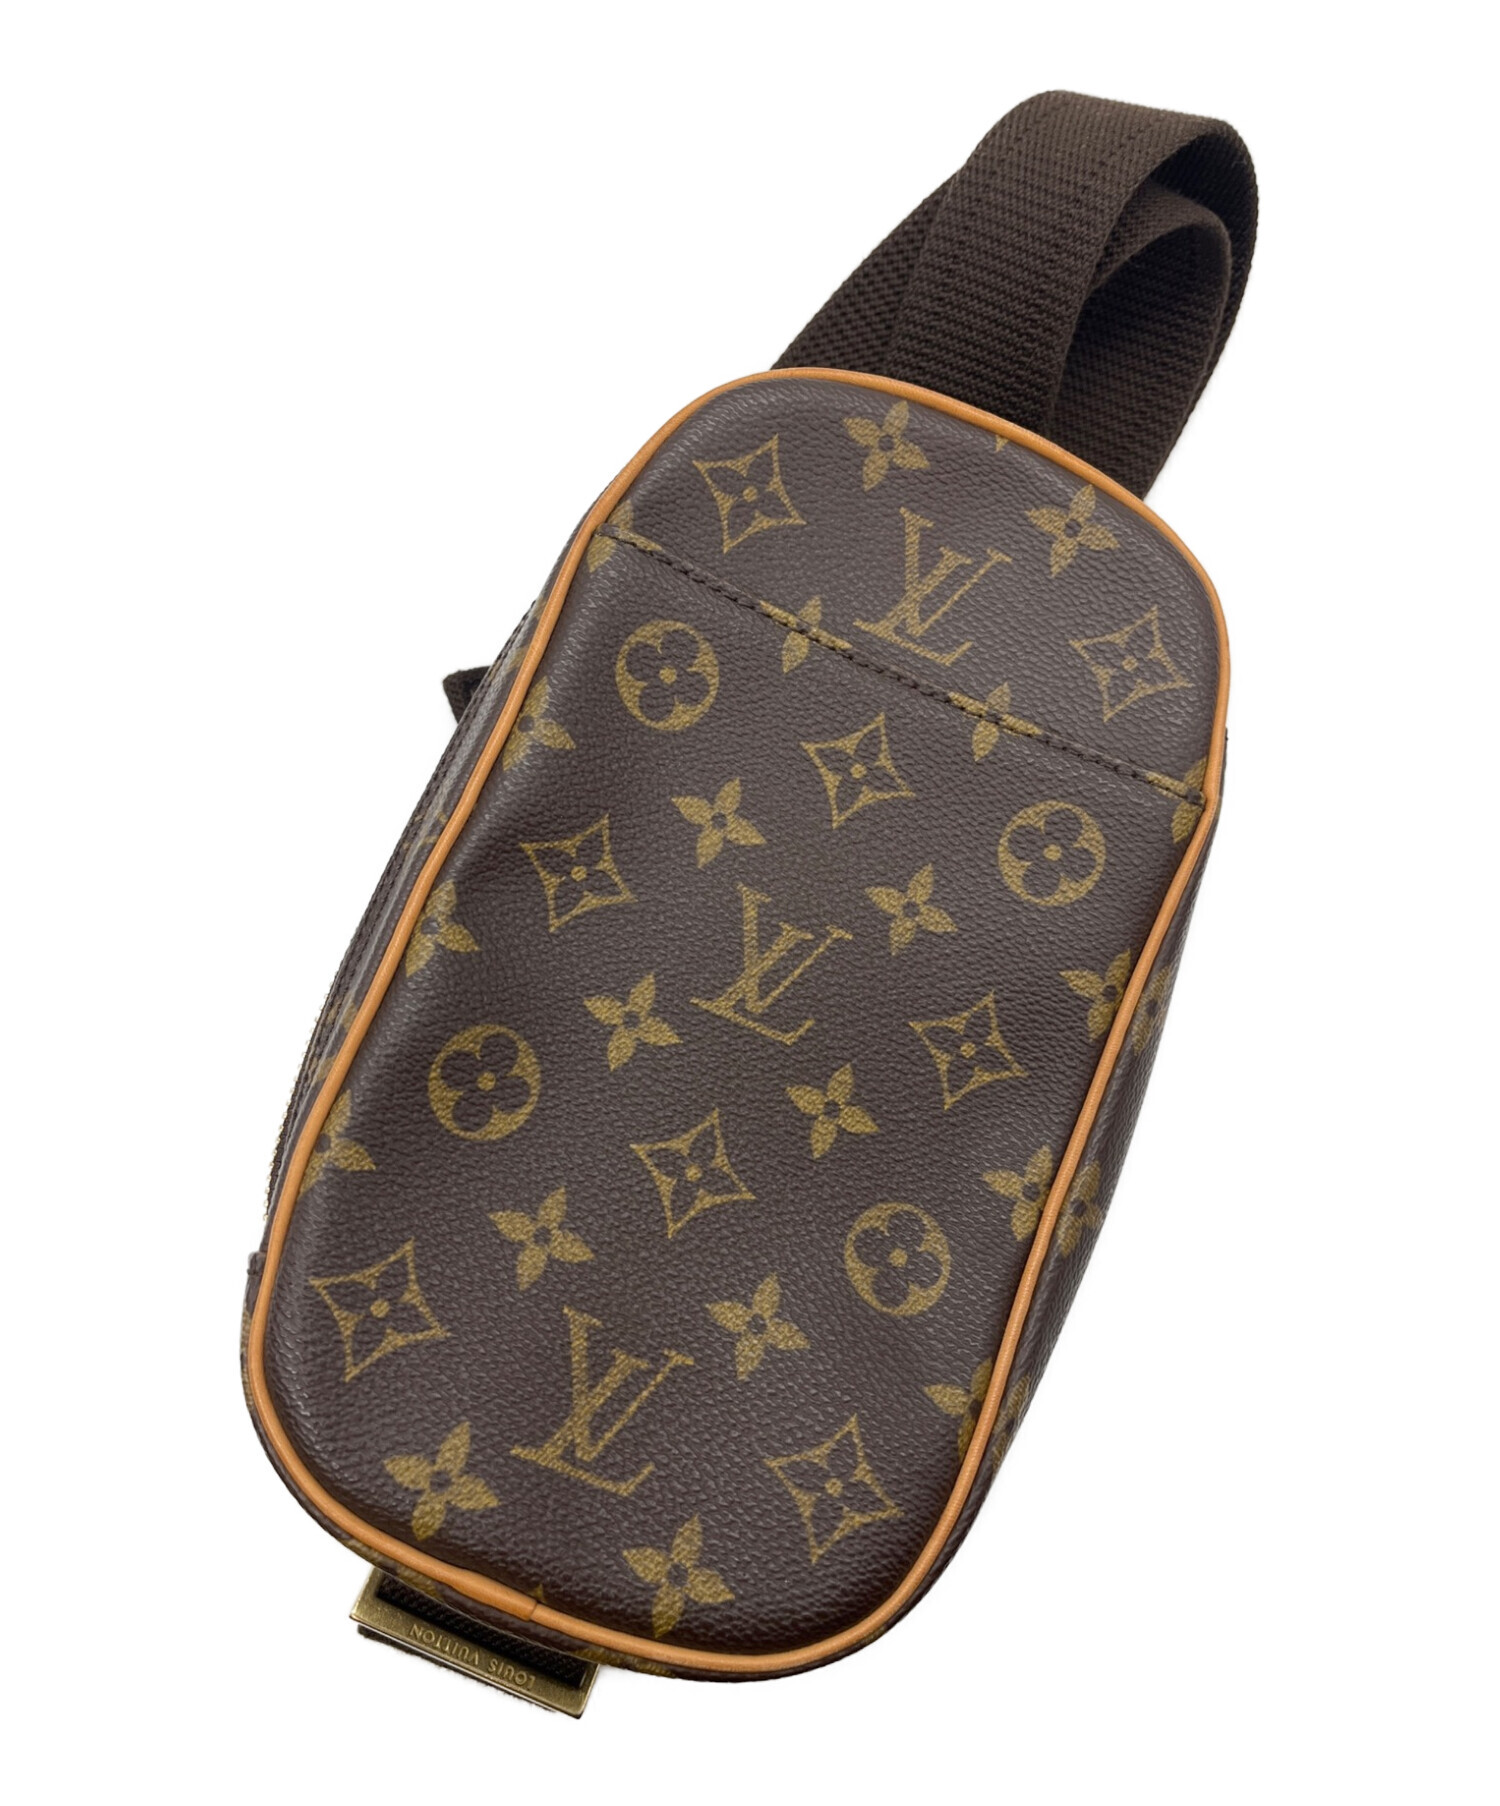 LOUIS VUITTON (ルイ ヴィトン) ポシェット